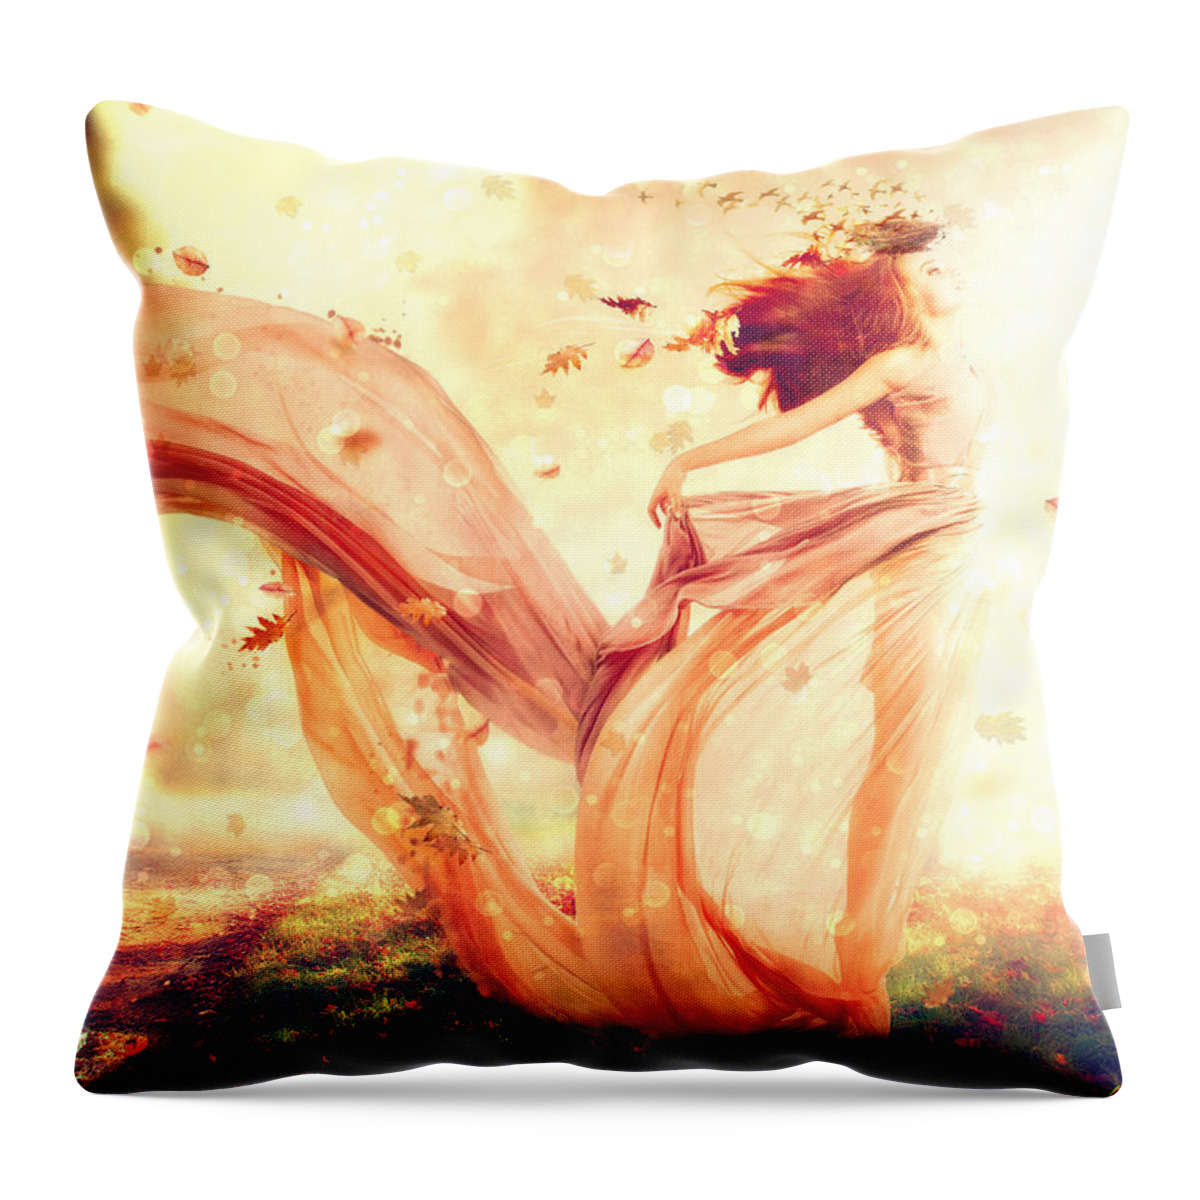 Nymph Of October Throw Pillow featuring the digital art Nymph of October by Lilia D